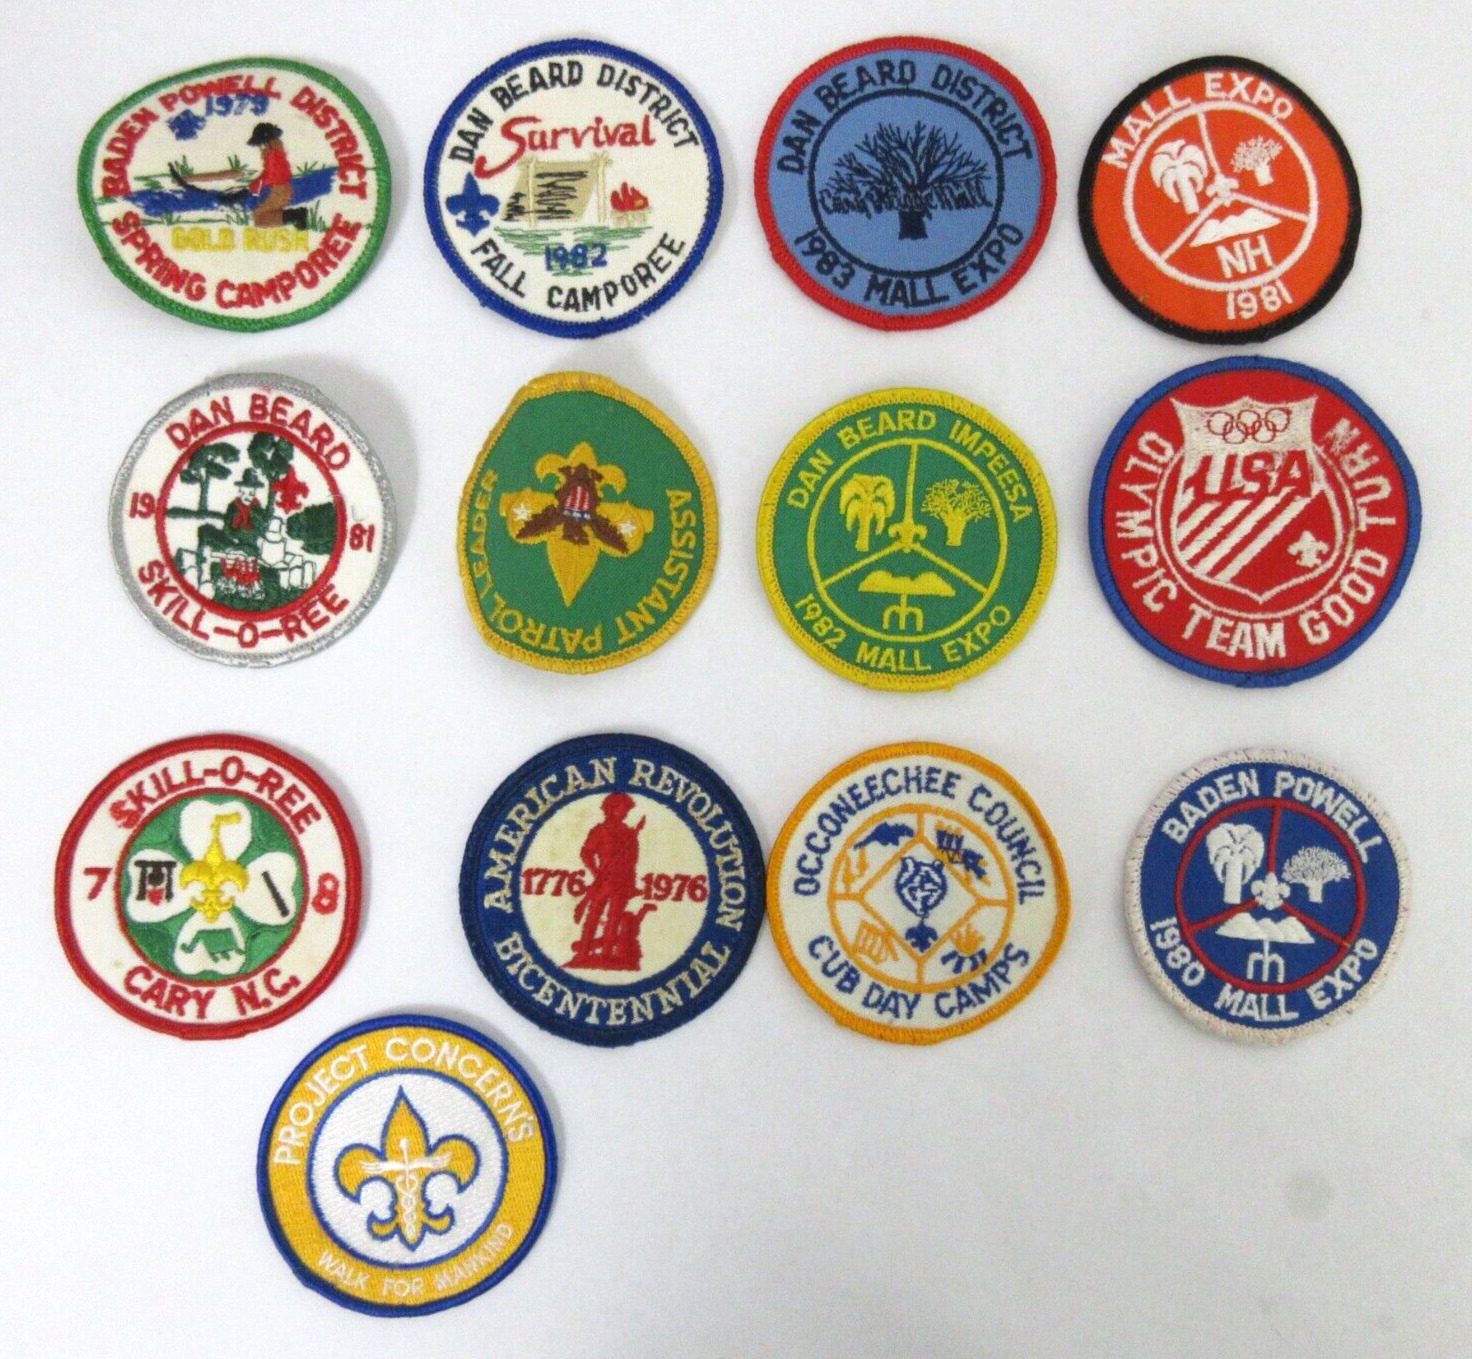 Boy Scouts Of America Lot Of 13 Badges Skill-o-ree Mall Expo Asst Patrol Leader